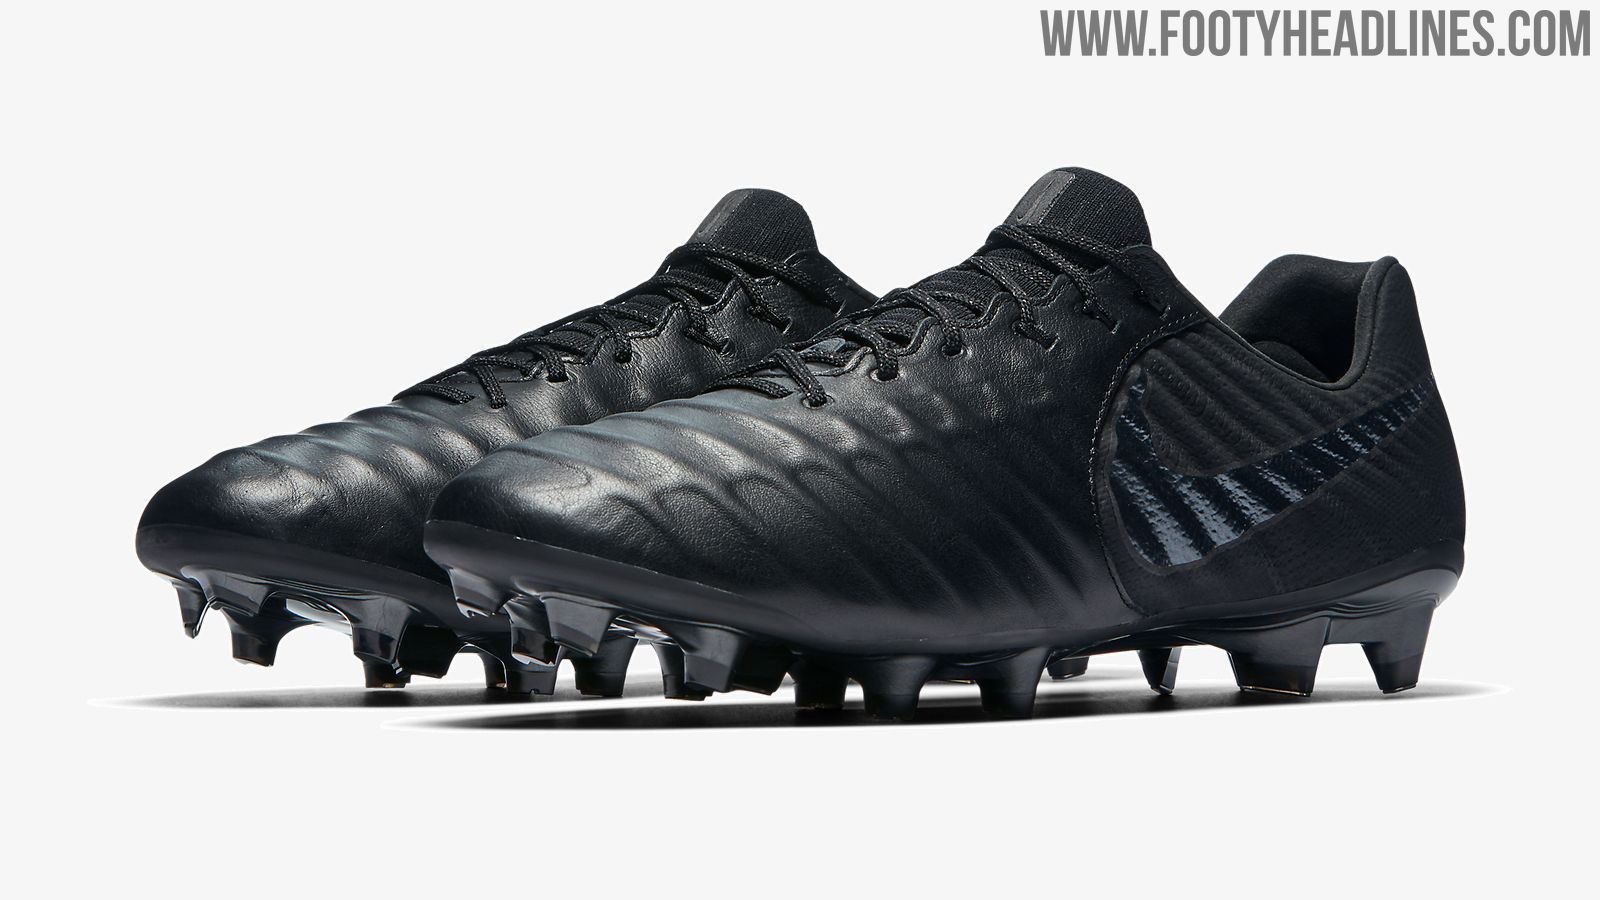 Blackout Legend VII Stealth Ops Boots Released Footy Headlines